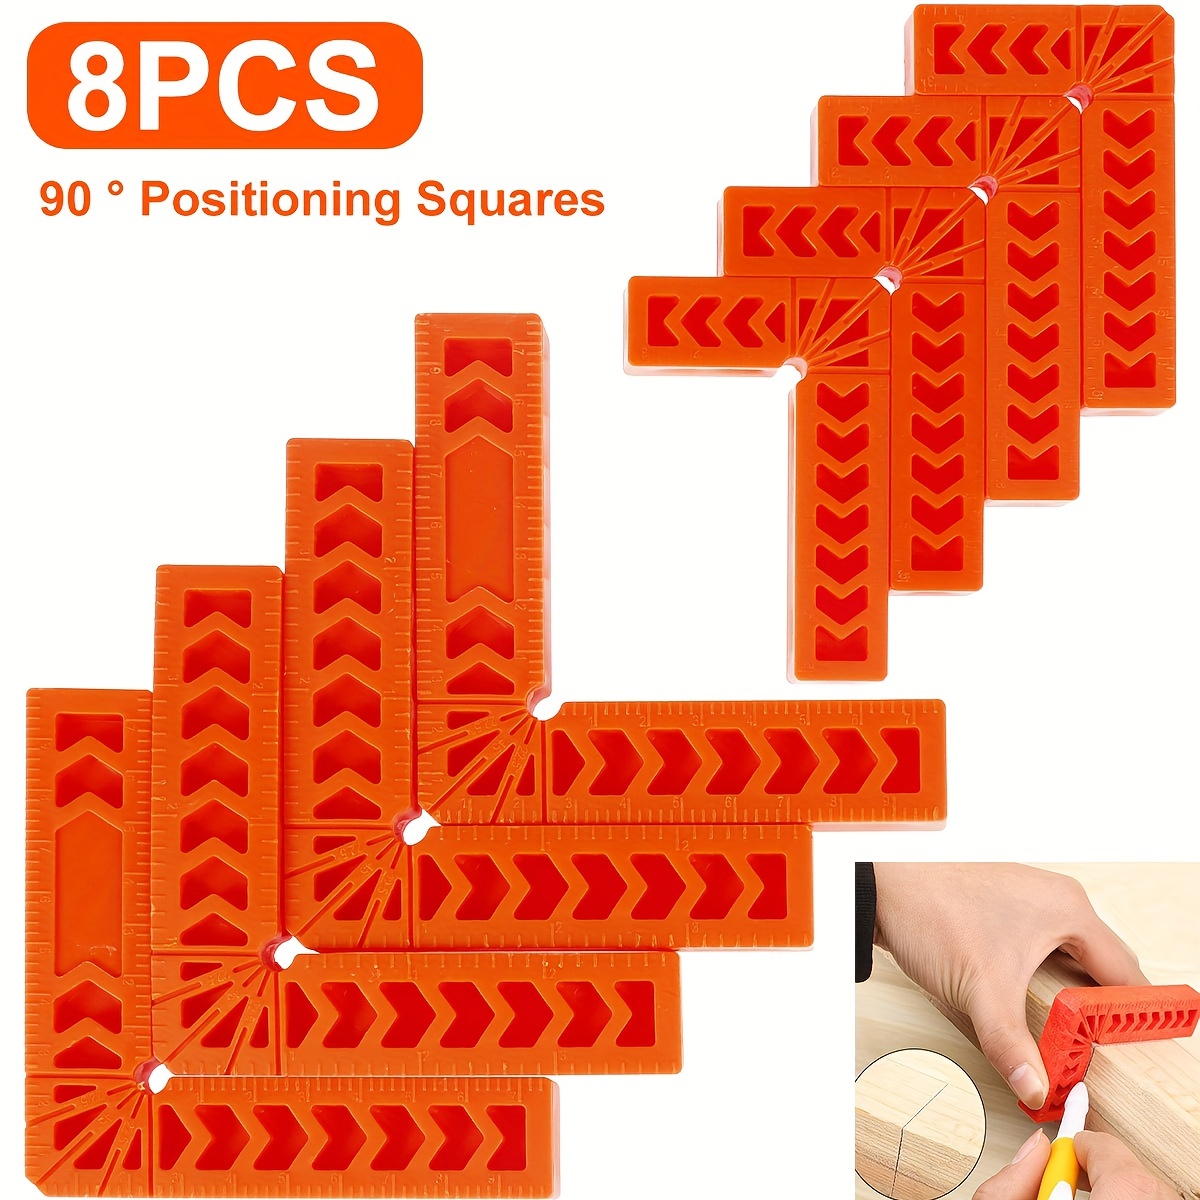 8pcs 90 Degree Positioning Squares 4 Inch 3 Inch Right Angle